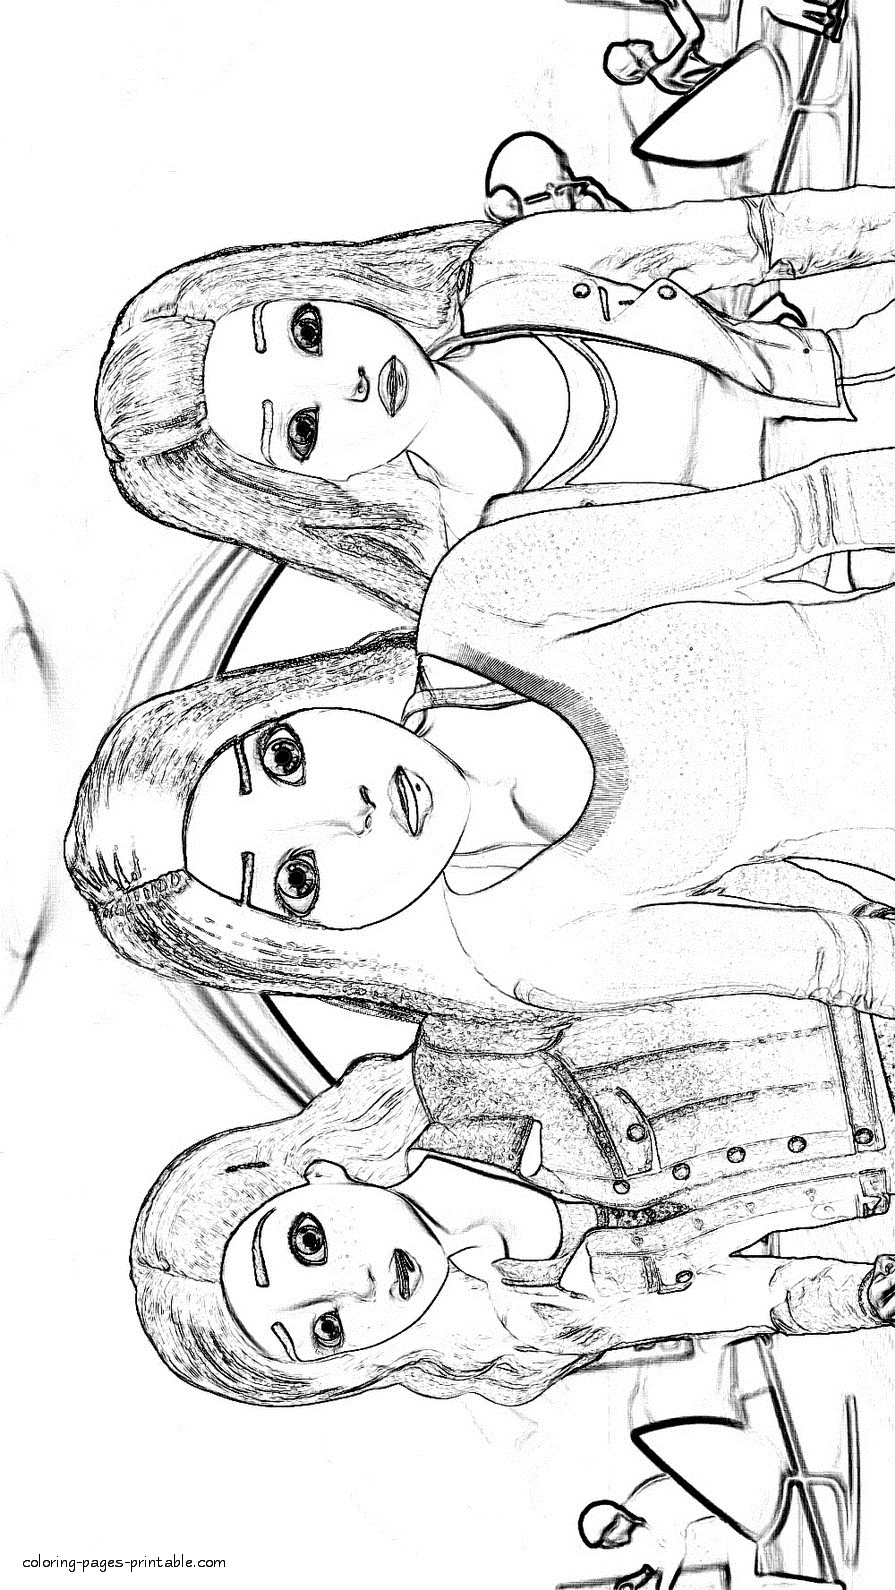 Barbie Spy Squad Coloring Pages
 Barbie Teresa and Renee coloring pages